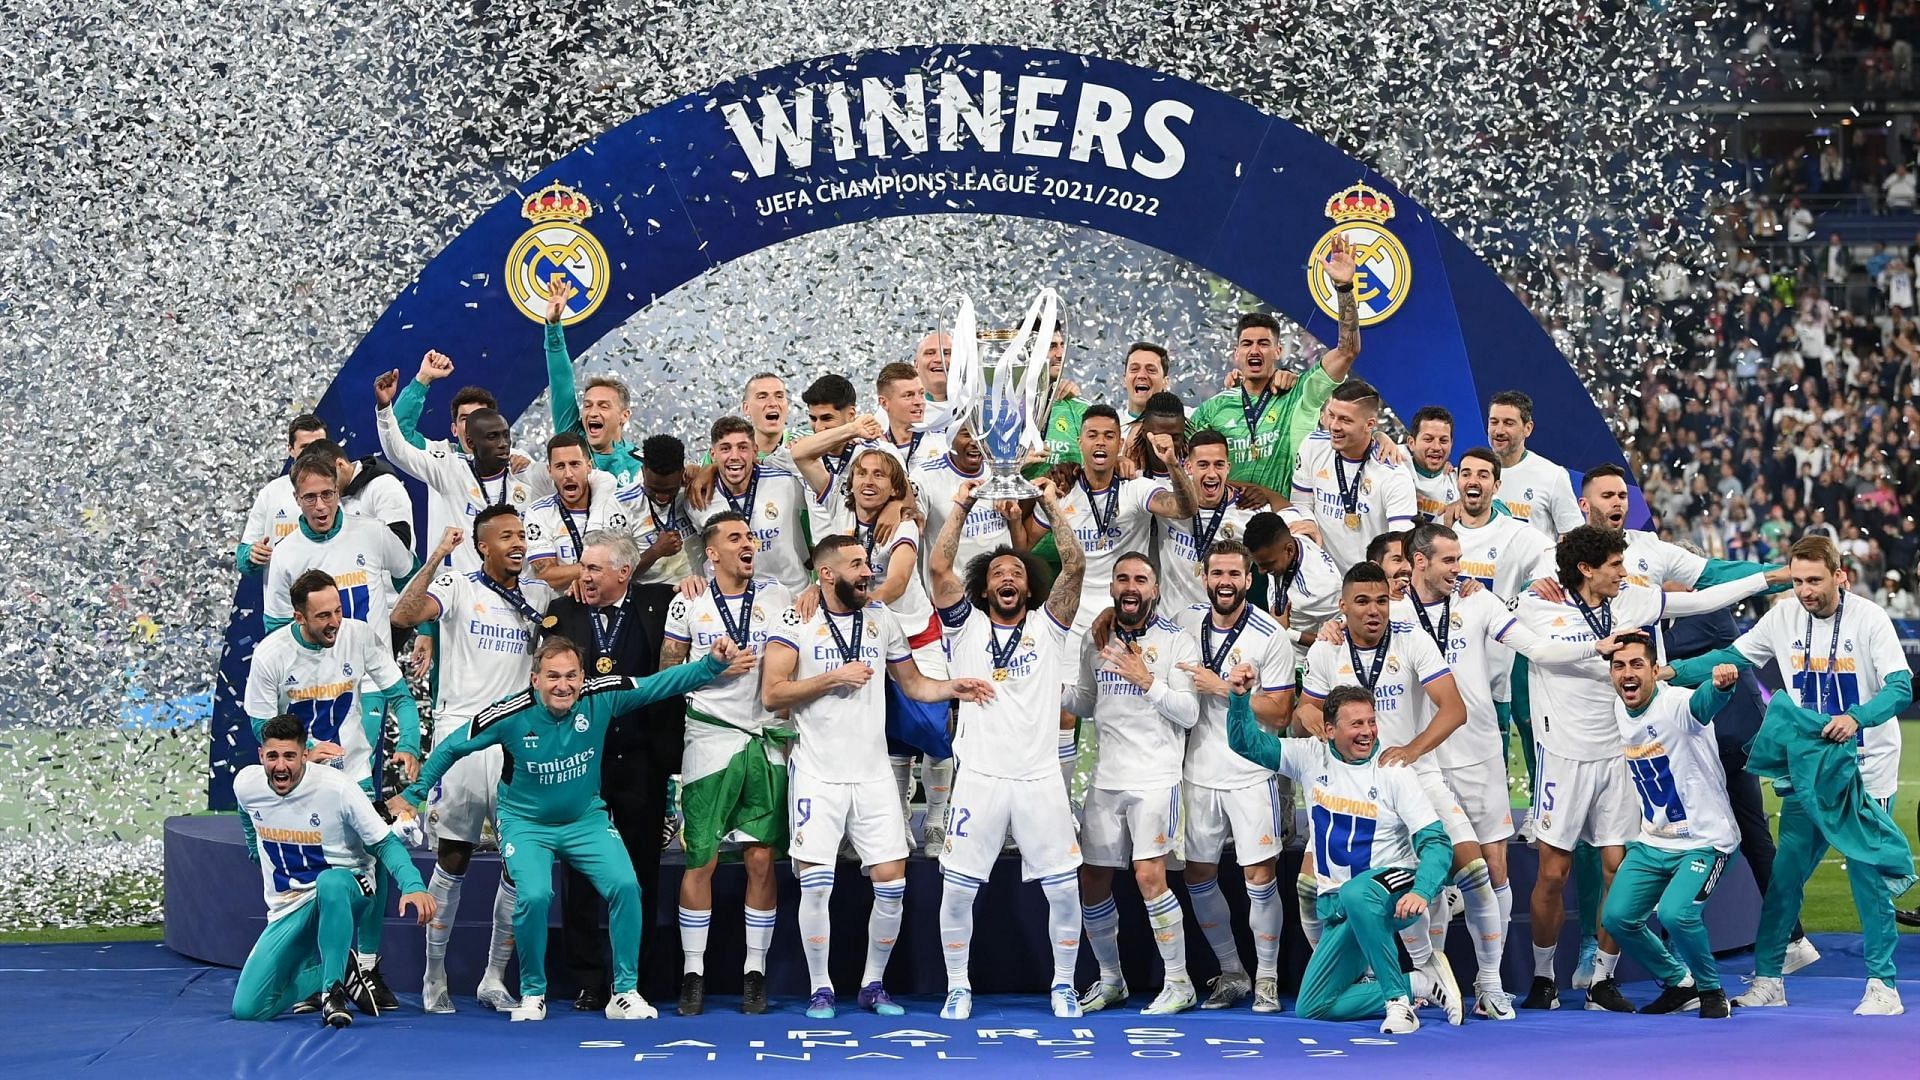 Real Madrid players celebrate after winning the 2021-22 Champions League title.